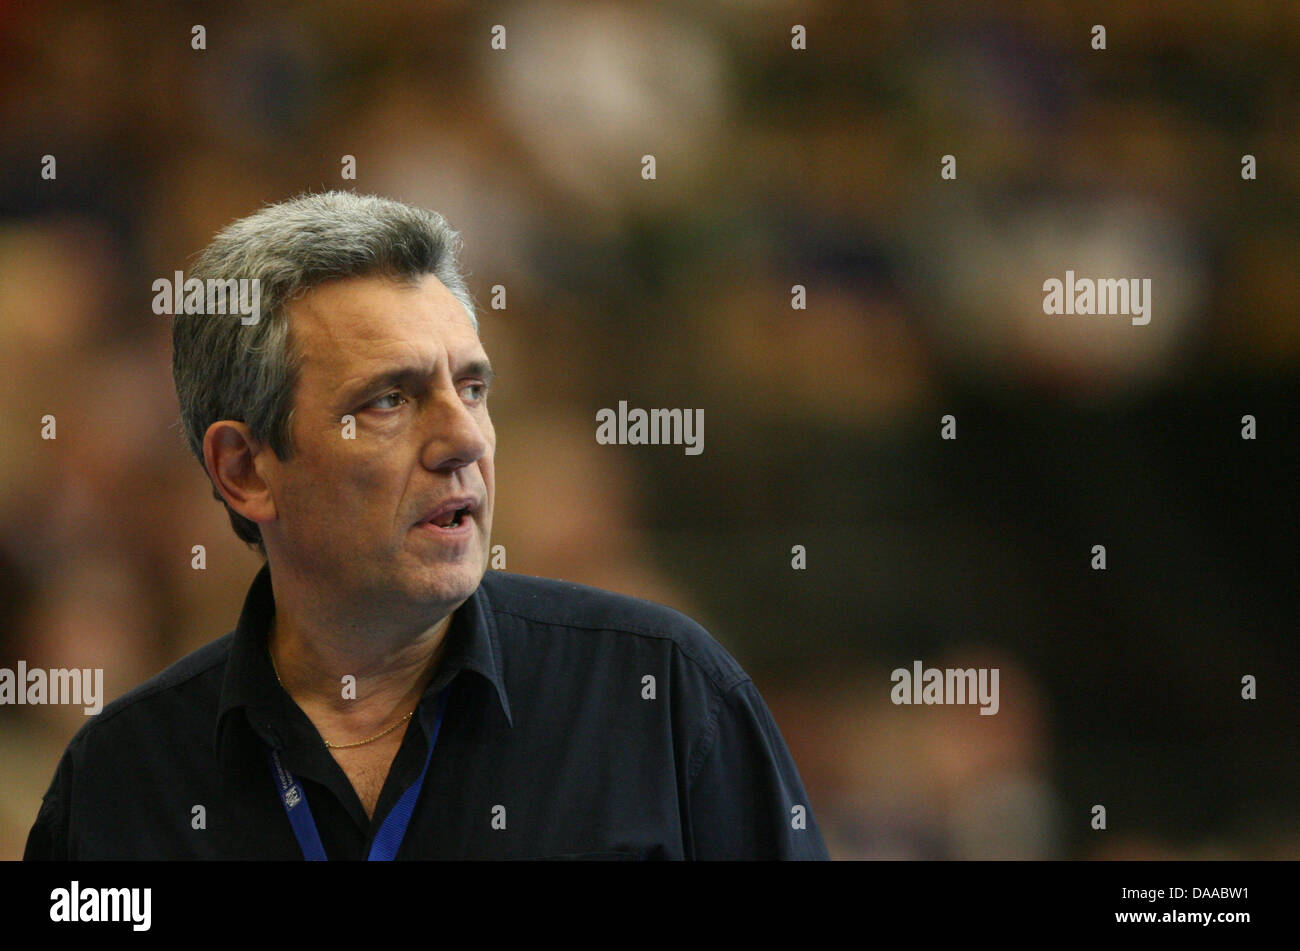 Claude Onesta, coach of France, is seen during the Men's Handball World Championship preliminary round group A match Germany against France in Kristianstad, Sweden, 19 January 2011. Photo: Jens Wolf dpa Stock Photo